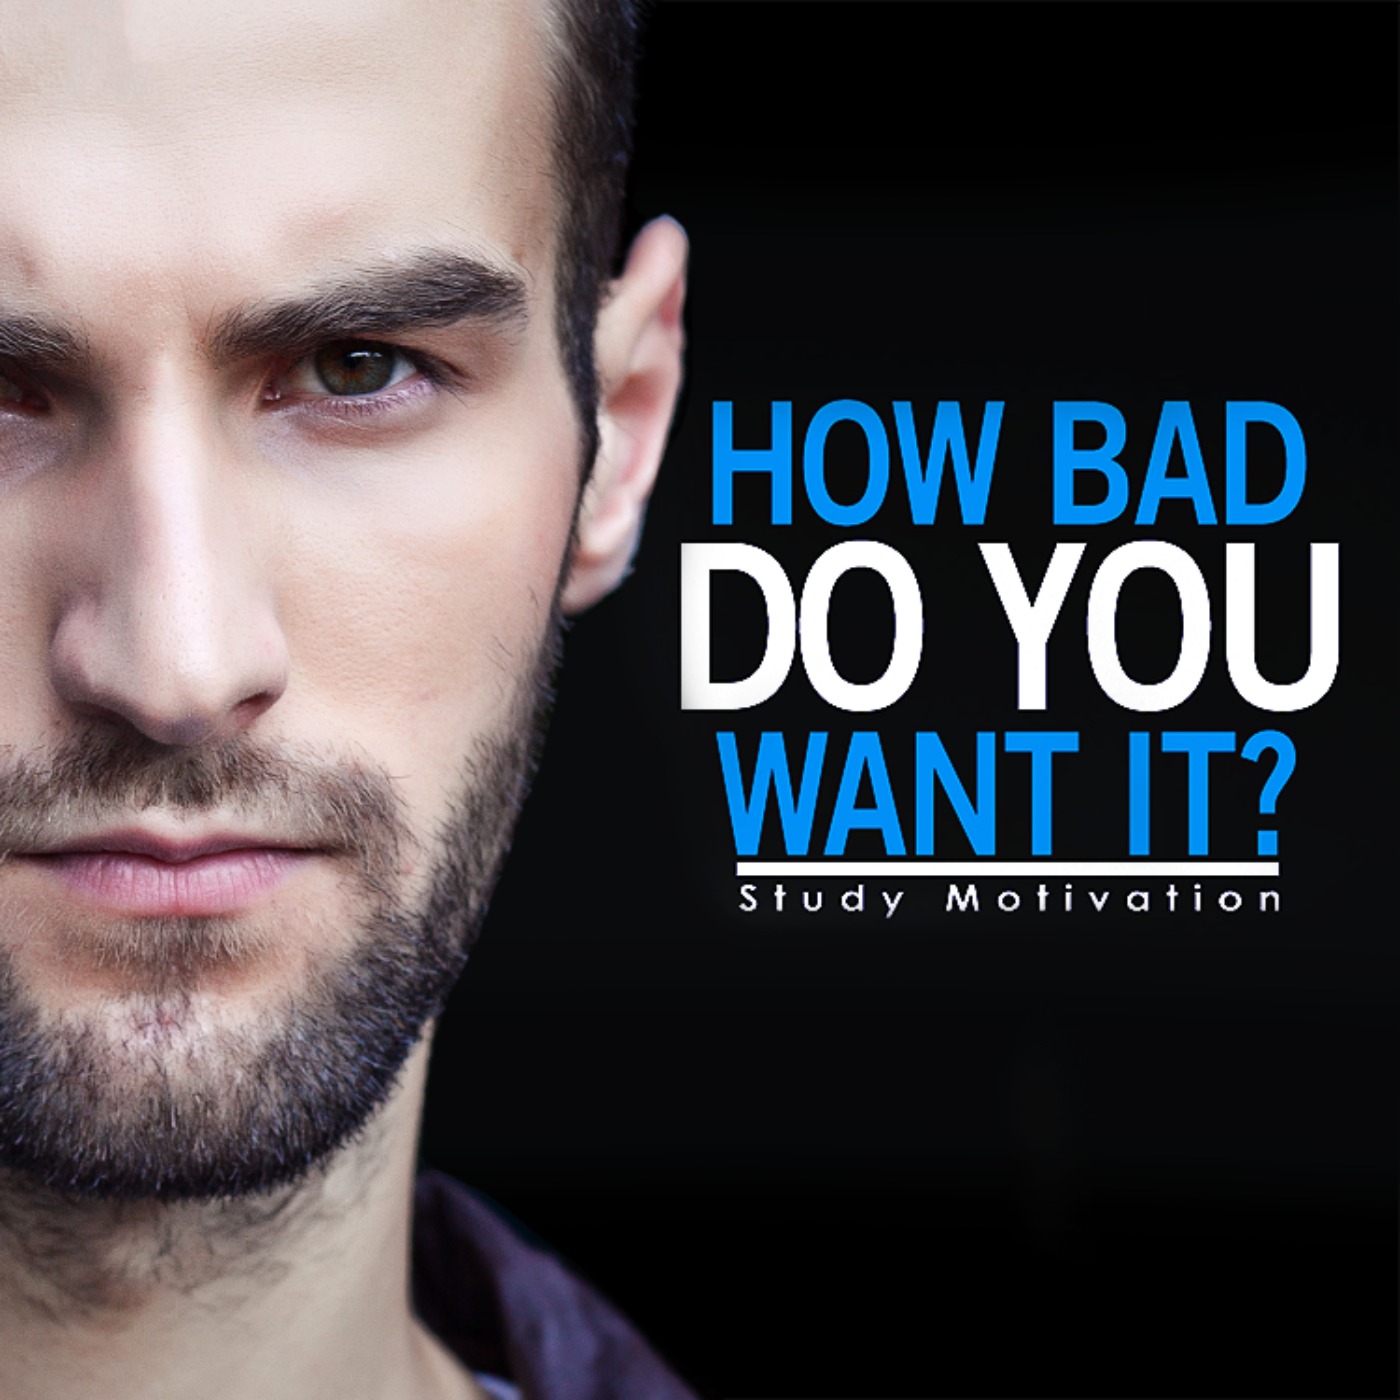 HOW BAD DO YOU WANT IT? (SUCCESS)